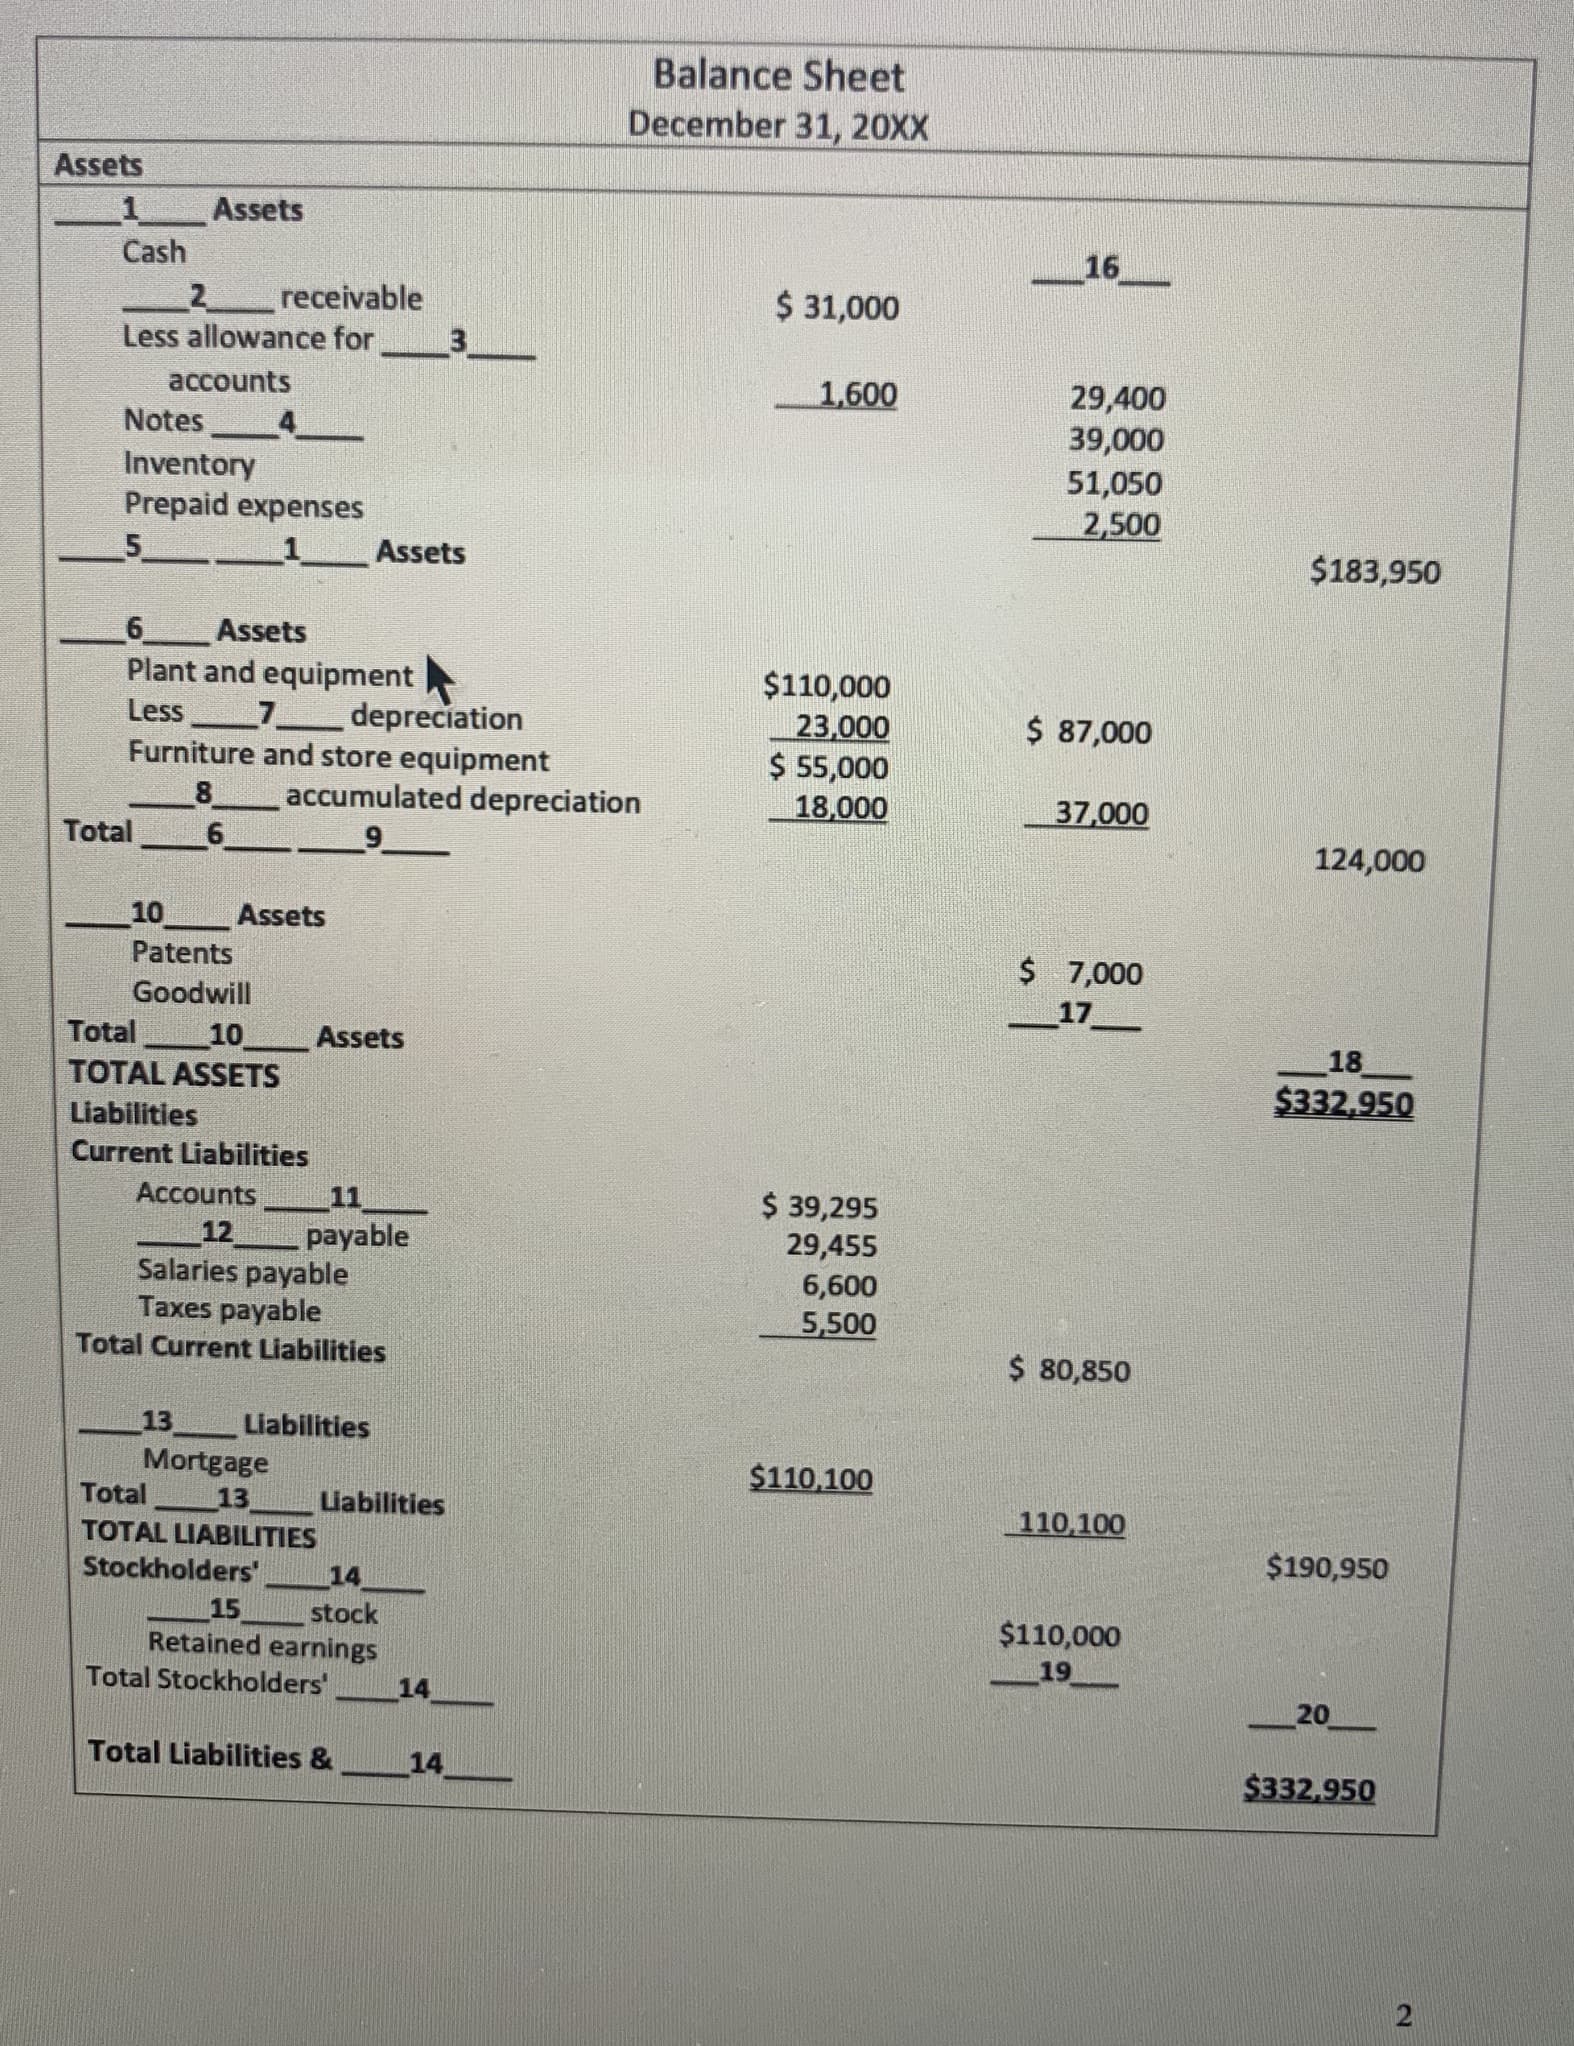 Balance Sheet
December 31, 20XX
Assets
1.
Assets
Cash
16
2 receivable
3.
$ 31,000
Less allowance for
29,400
39,000
accounts
1,600
Notes
Inventory
Prepaid expenses
51,050
2,500
Assets
$183,950
6.
Assets
Plant and equipment
$110,000
23,000
$ 55,000
18,000
Less
depreciation
$ 87,000
7.
Furniture and store equipment
accumulated depreciation
37,000
Total
124,000
10
Assets
$ 7,000
17
Patents
Goodwill
Total
10
TOTAL ASSETS
Assets
18
$332,950
Liabilities
Current Liabilities
$ 39,295
29,455
Accounts
11
payable
Salaries payable
Taxes payable
Total Current Liabilities
12
6,600
5,500
$ 80,850
13
Liabilities
Mortgage
Total
$110,100
13
TOTAL LIABILITIES
Liabilities
110,100
$190,950
Stockholders'
14
stock
Retained earnings
15
$110,000
19
Total Stockholders'
14
20
Total Liabilities &
14
$332,950
